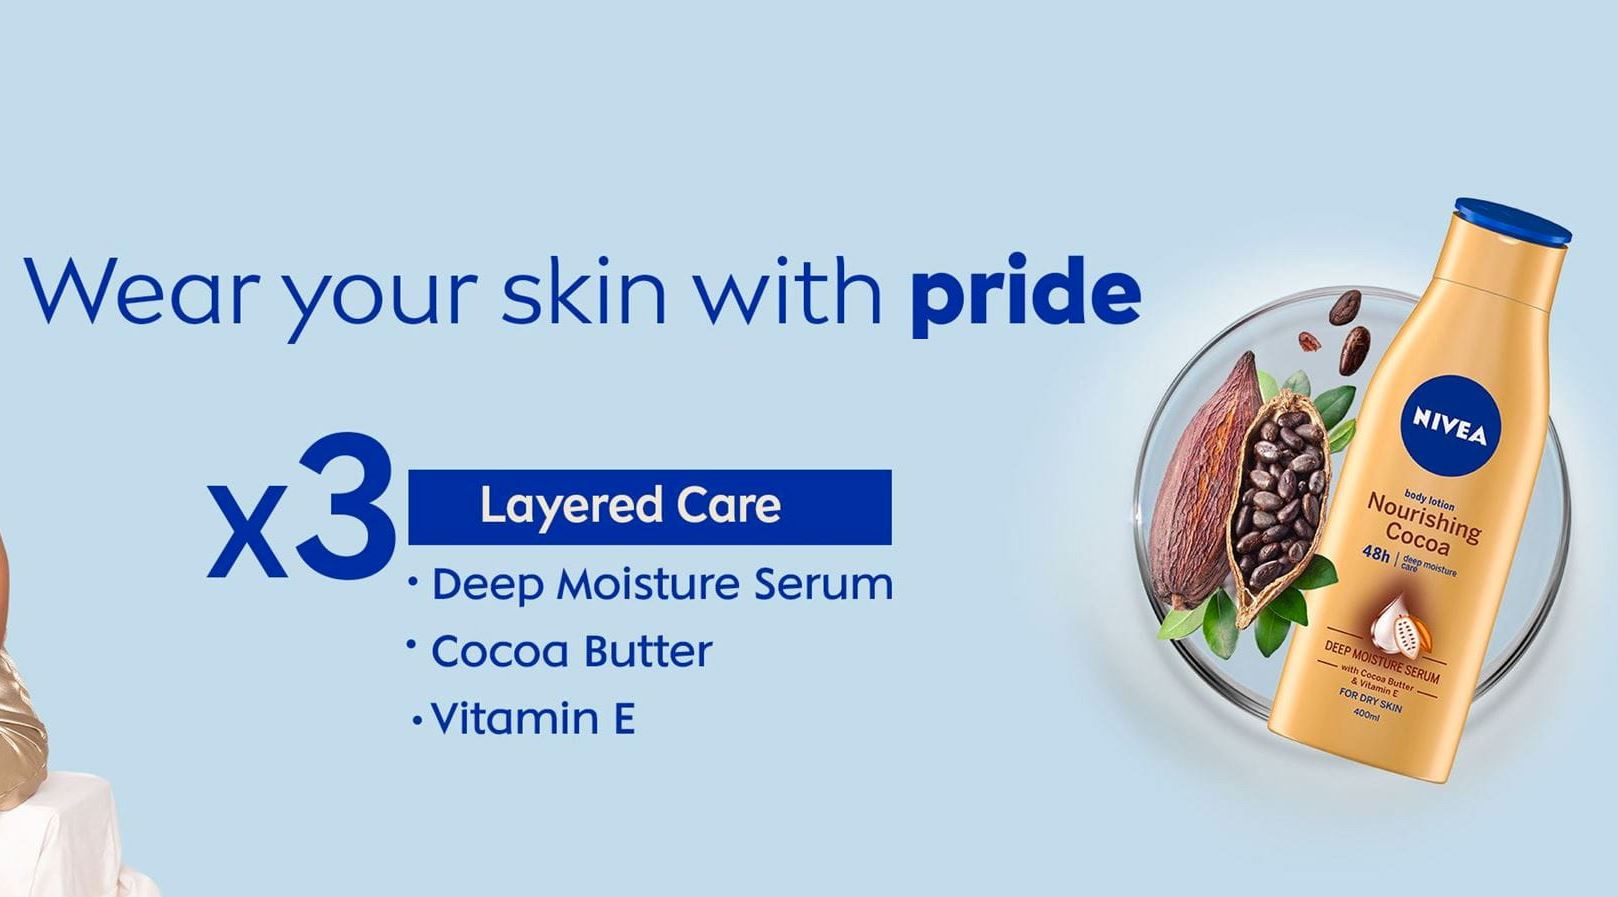 Wear your skin with pride with Nourishing Cocoa image banner